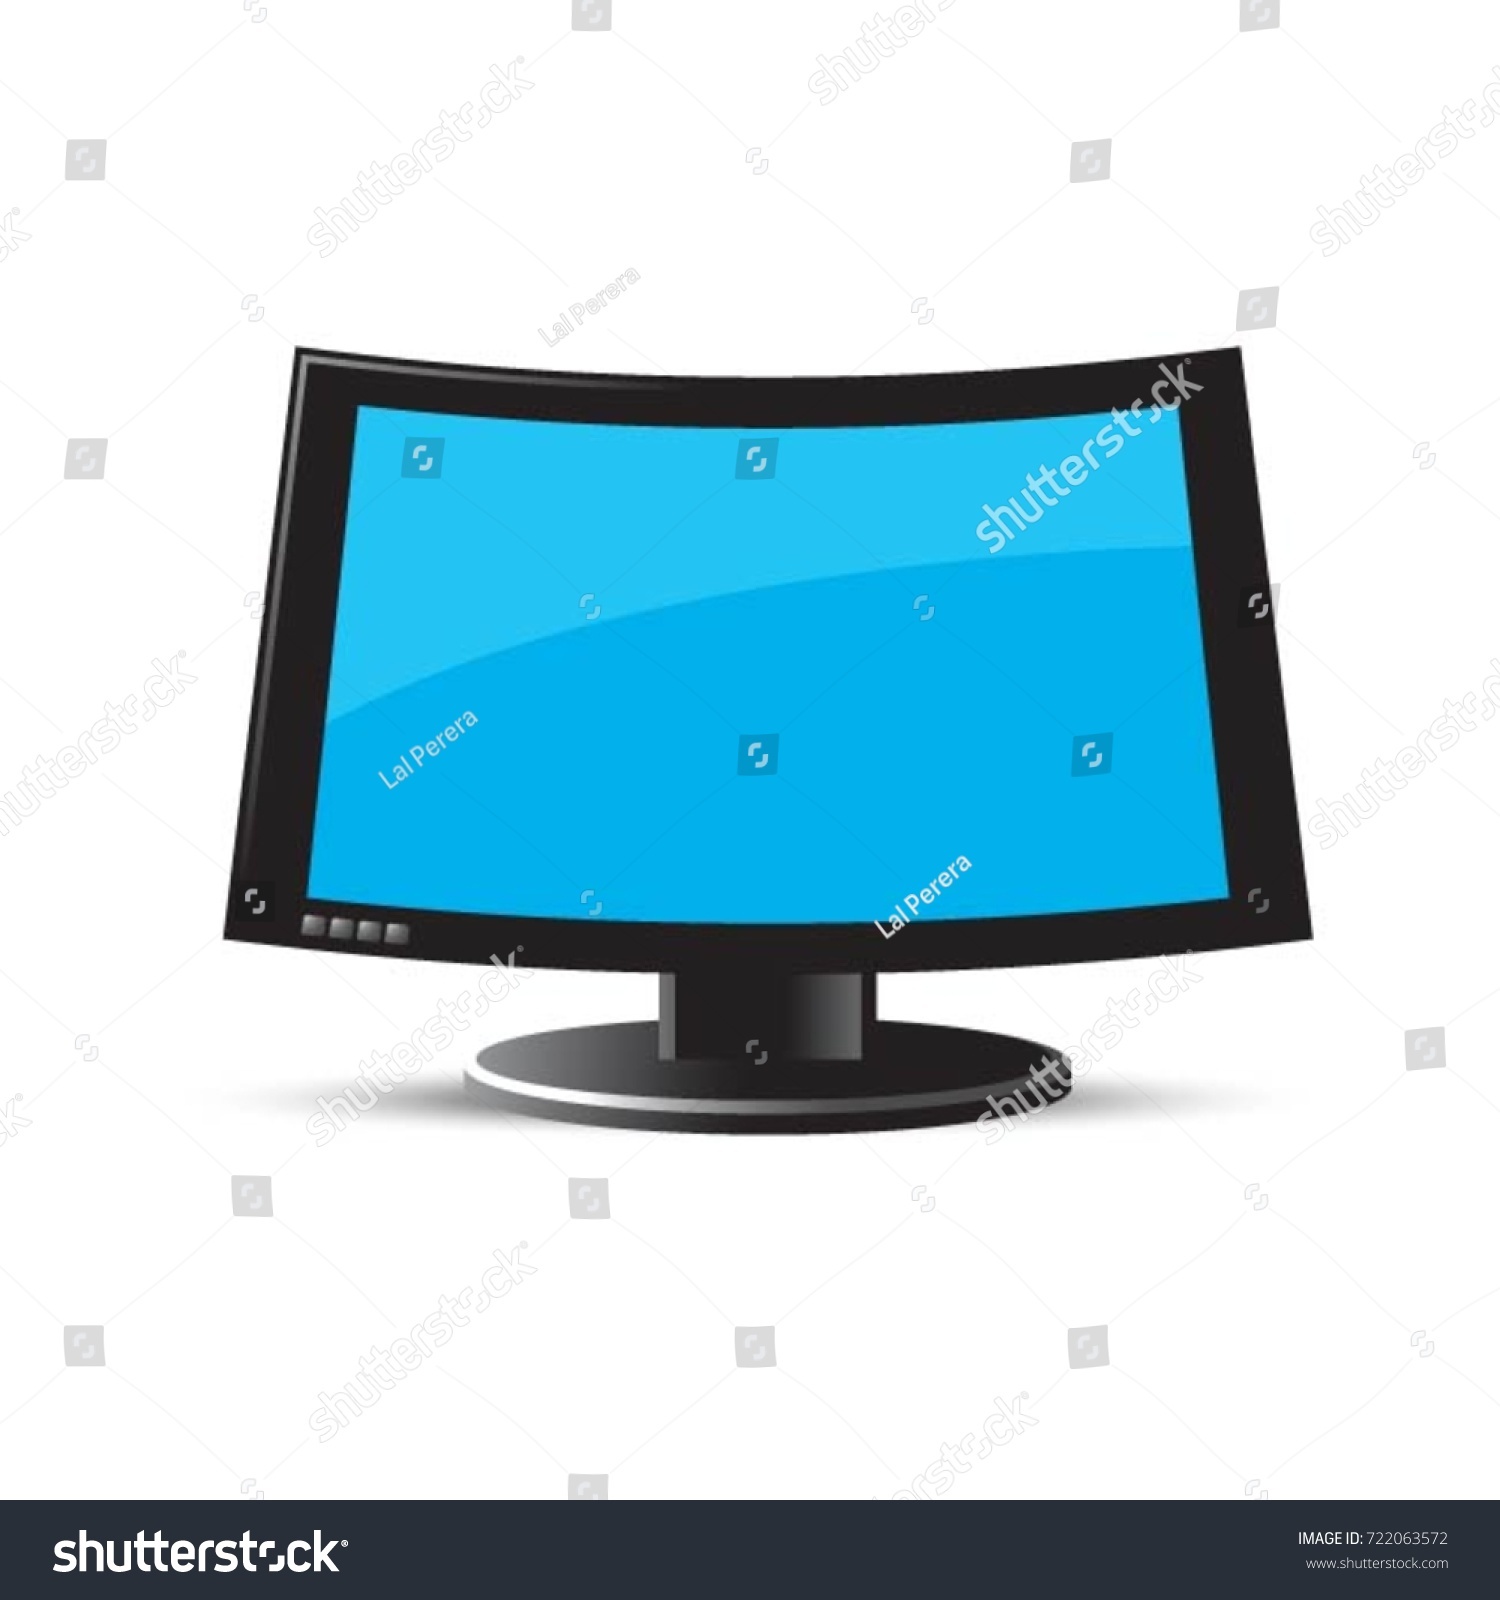 Computer Lcd Led Monitor Colorvector Drawing Stock Vector Royalty Free 722063572 Get the most out of your monitor by making sure it's properly calibrated. https www shutterstock com image vector computer lcd led monitor colorvector drawing 722063572